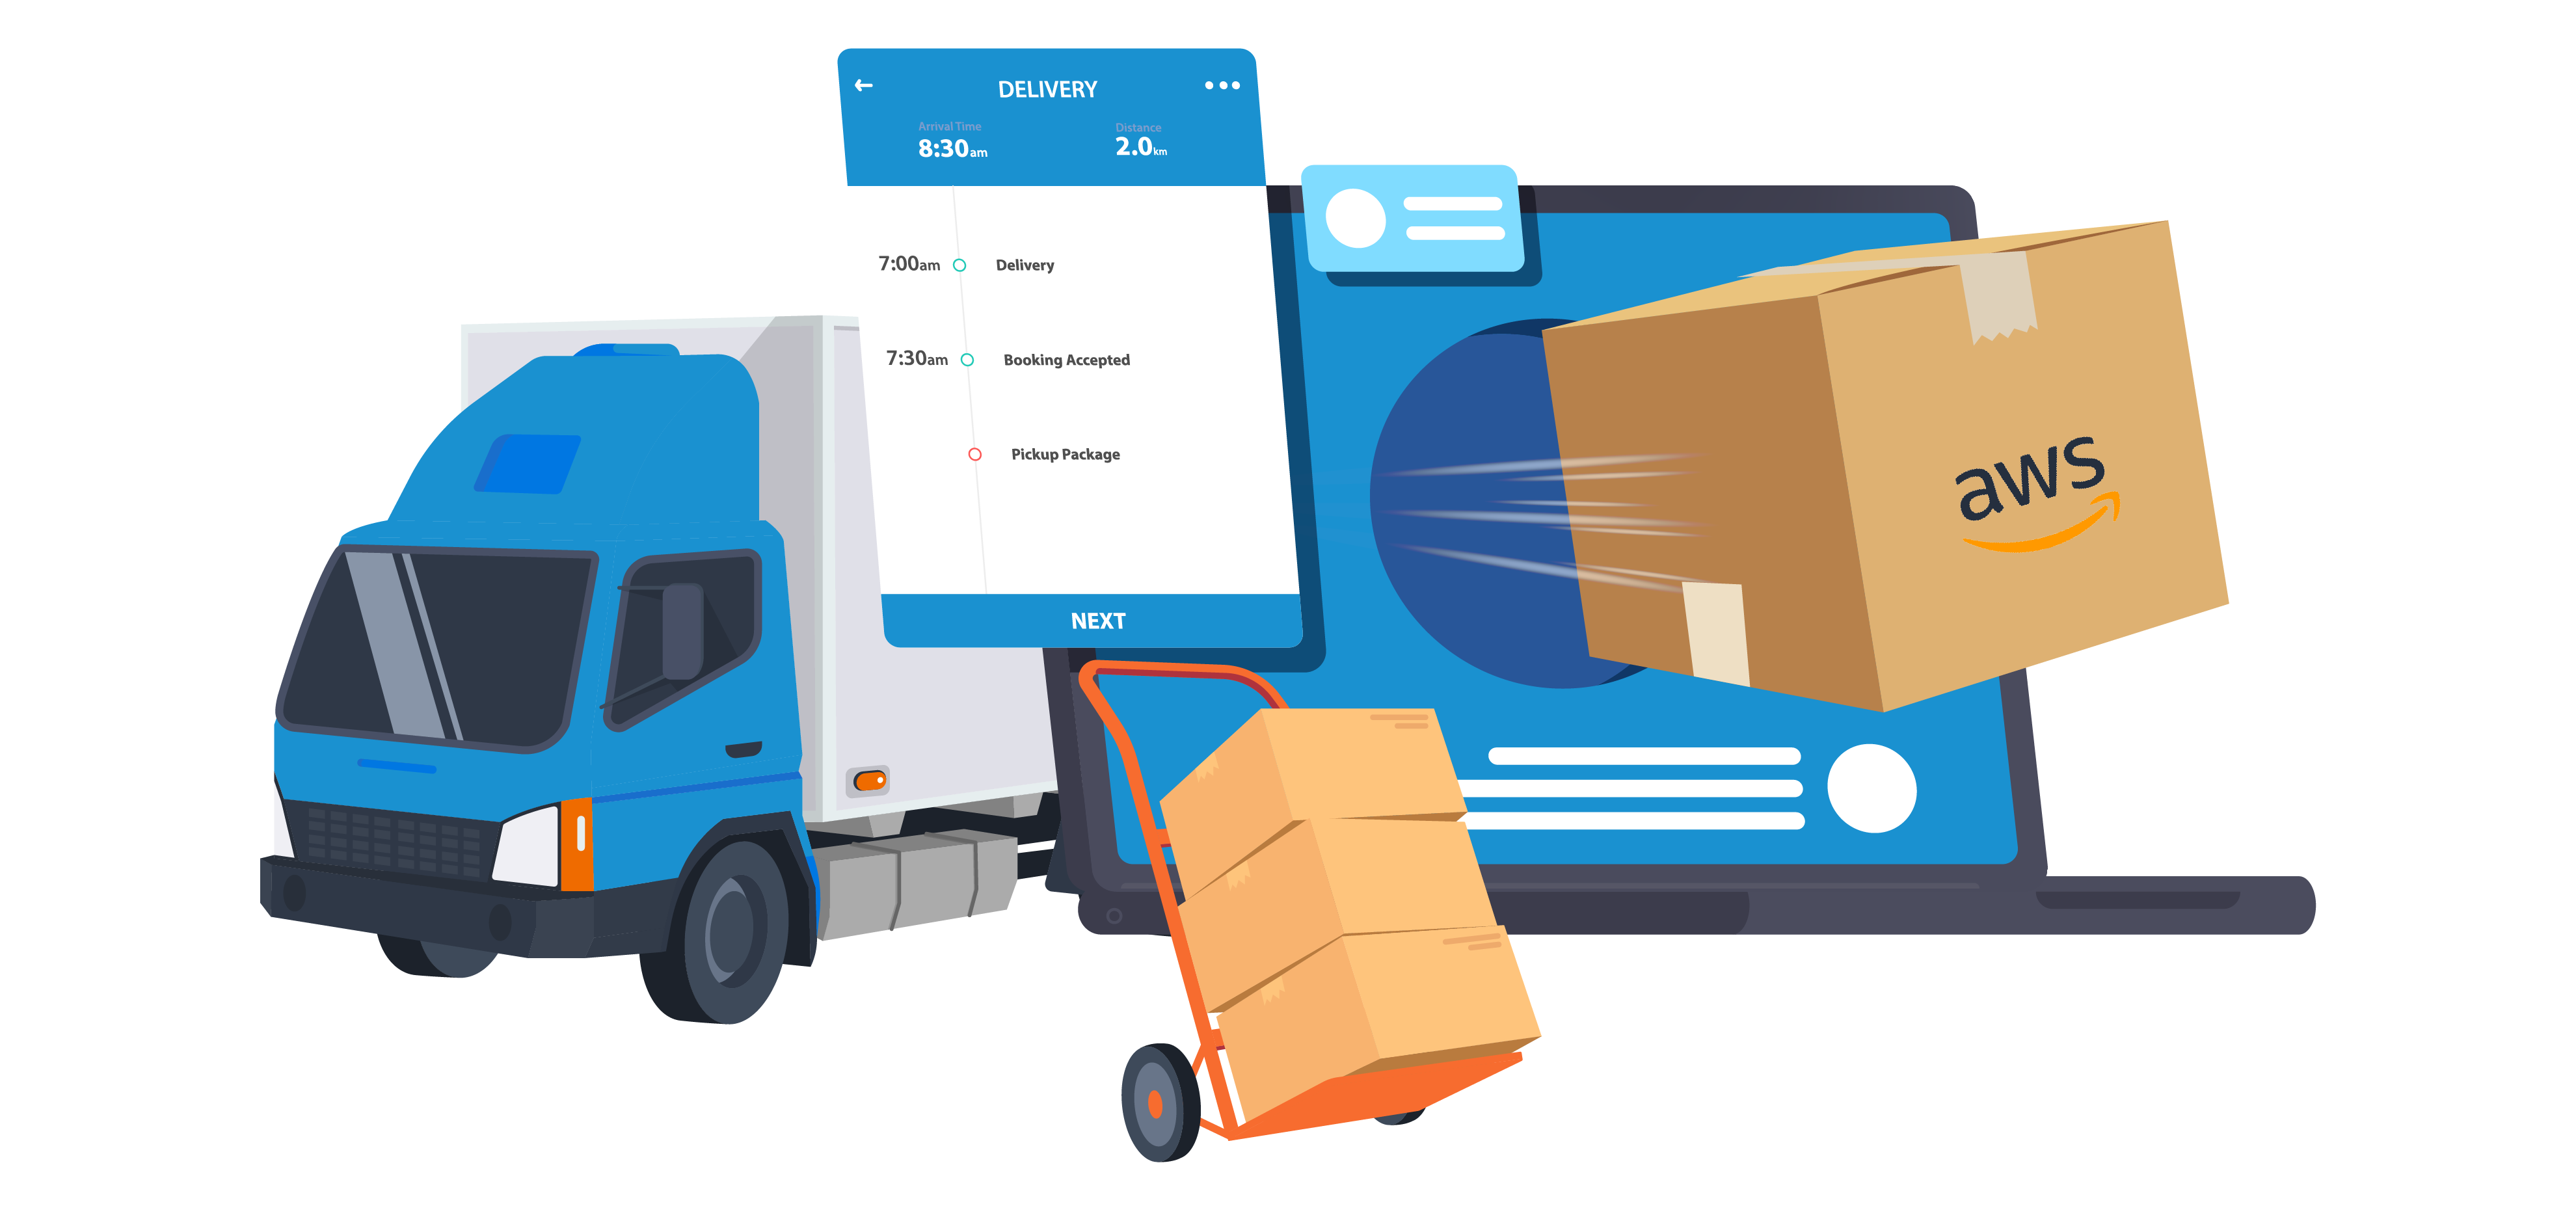 Representing the AWS Snowball product family with an image of a shipping container branded with AWS, being loaded onto a truck, symbolizing the shipment of physical storage devices.